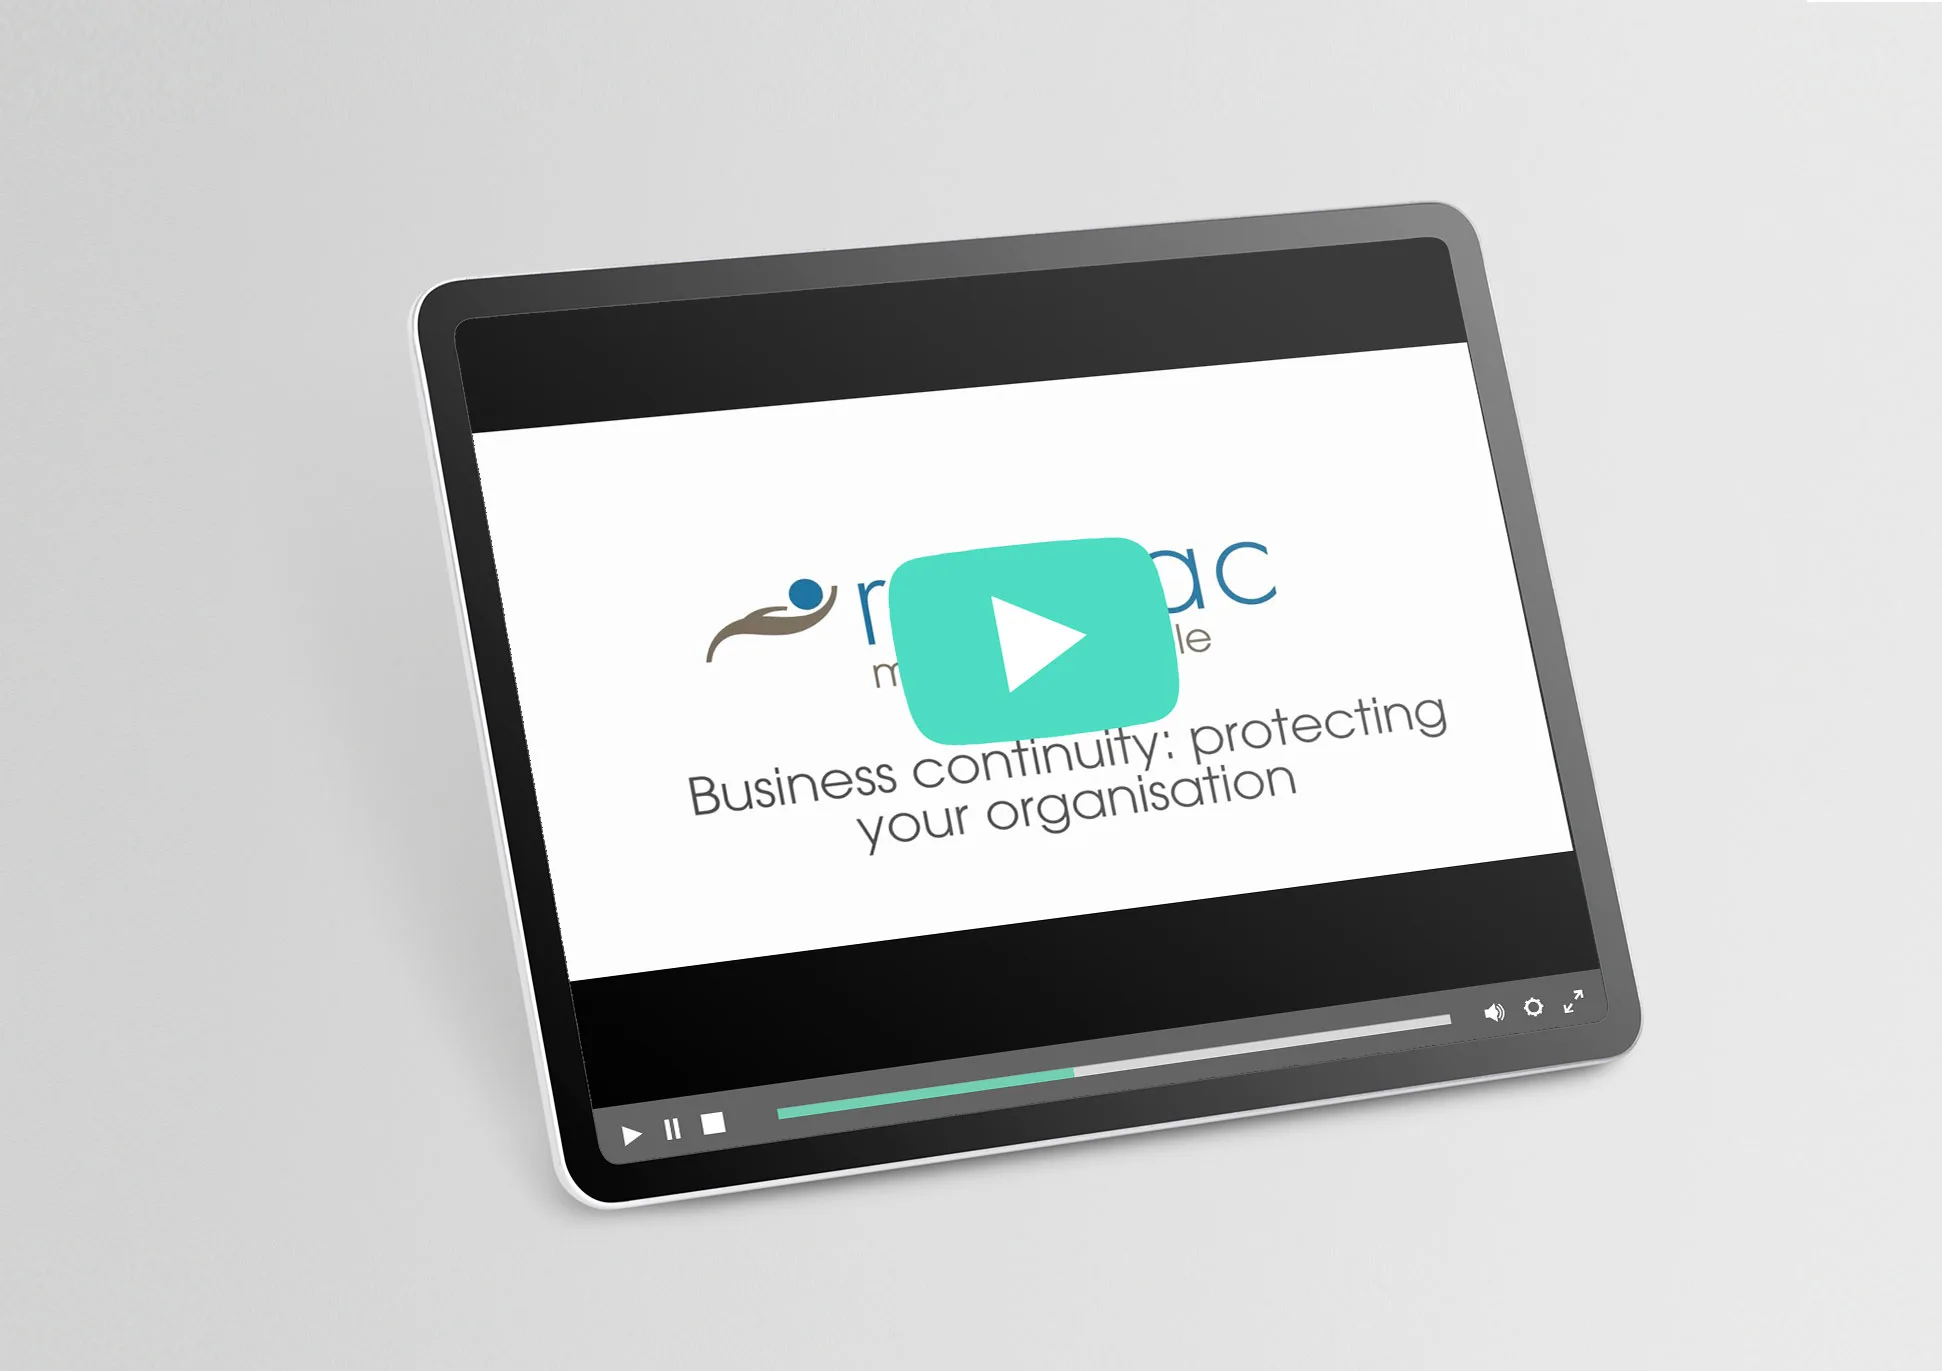 Video: Business continuity – protecting your organisation